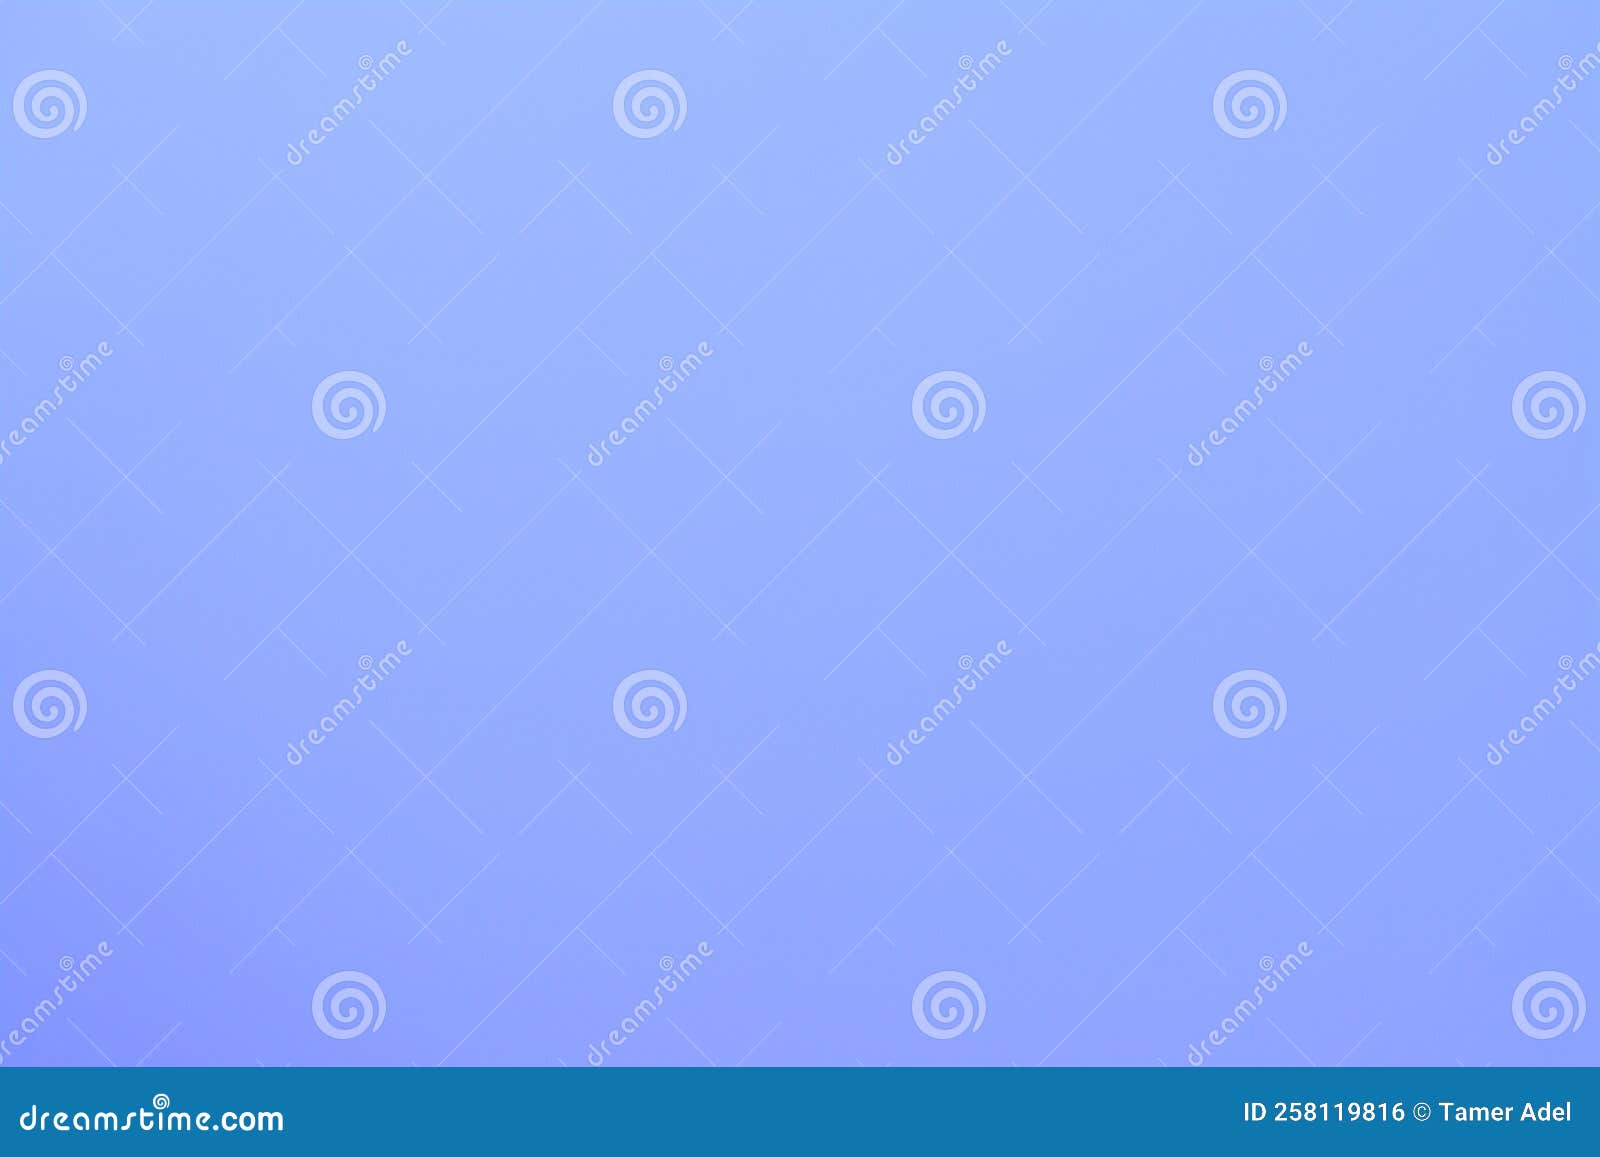 Gradient Blue Color Abstract Pastel Illustration with Gradient Blur ...